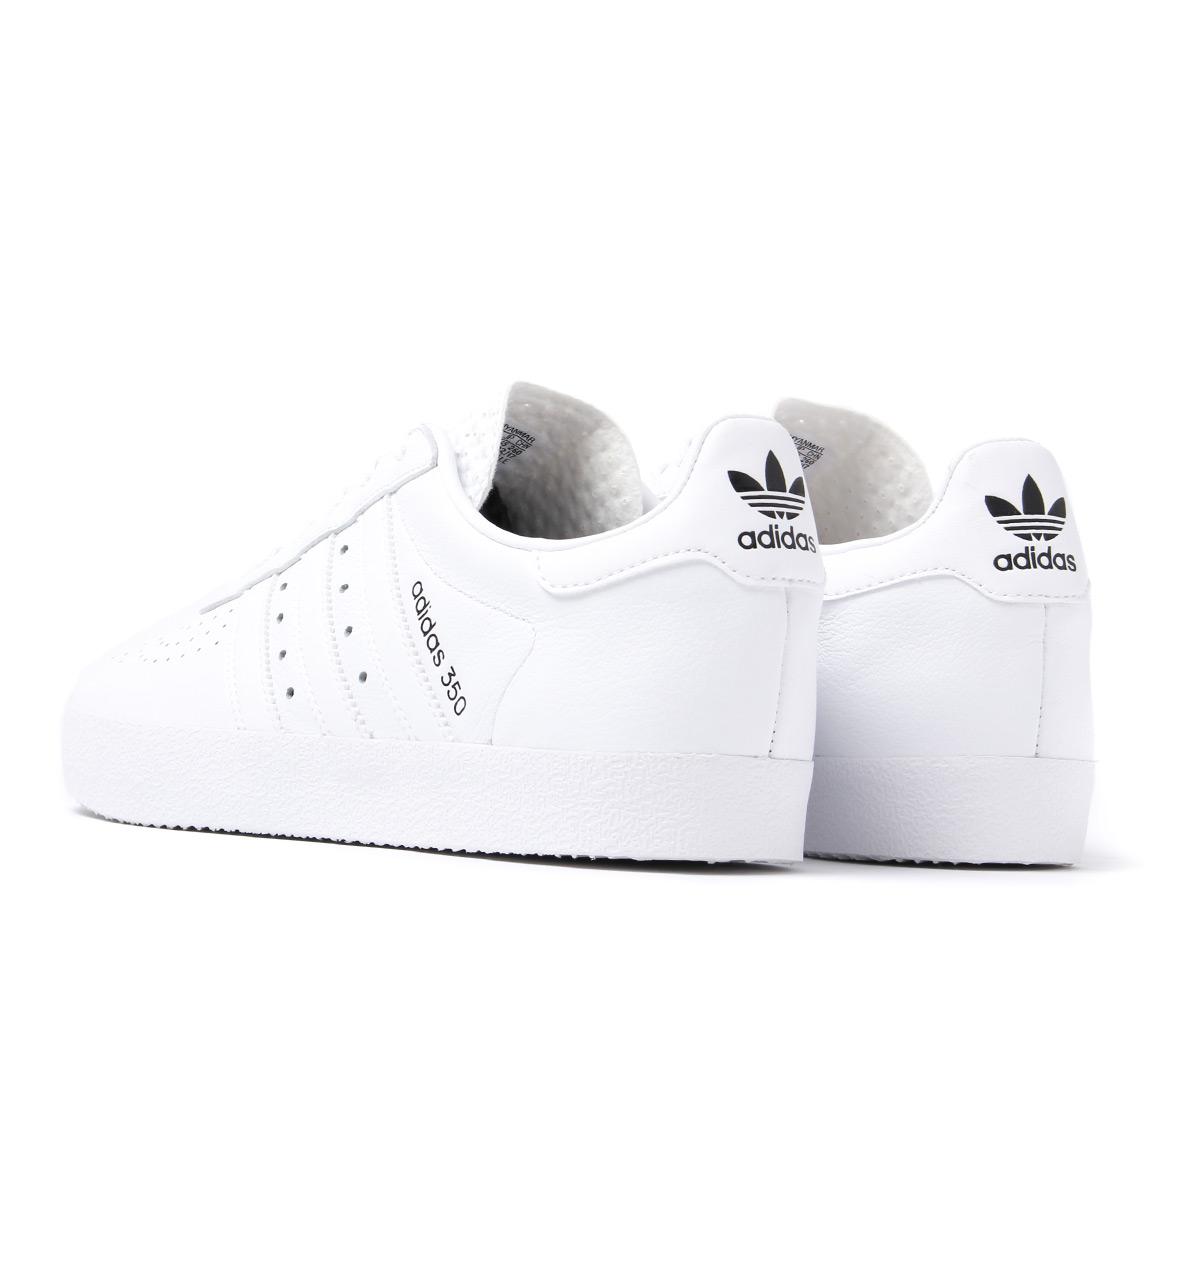 Adidas 350 White Leather Cheap Offers, Save 46% | old.baq.kz